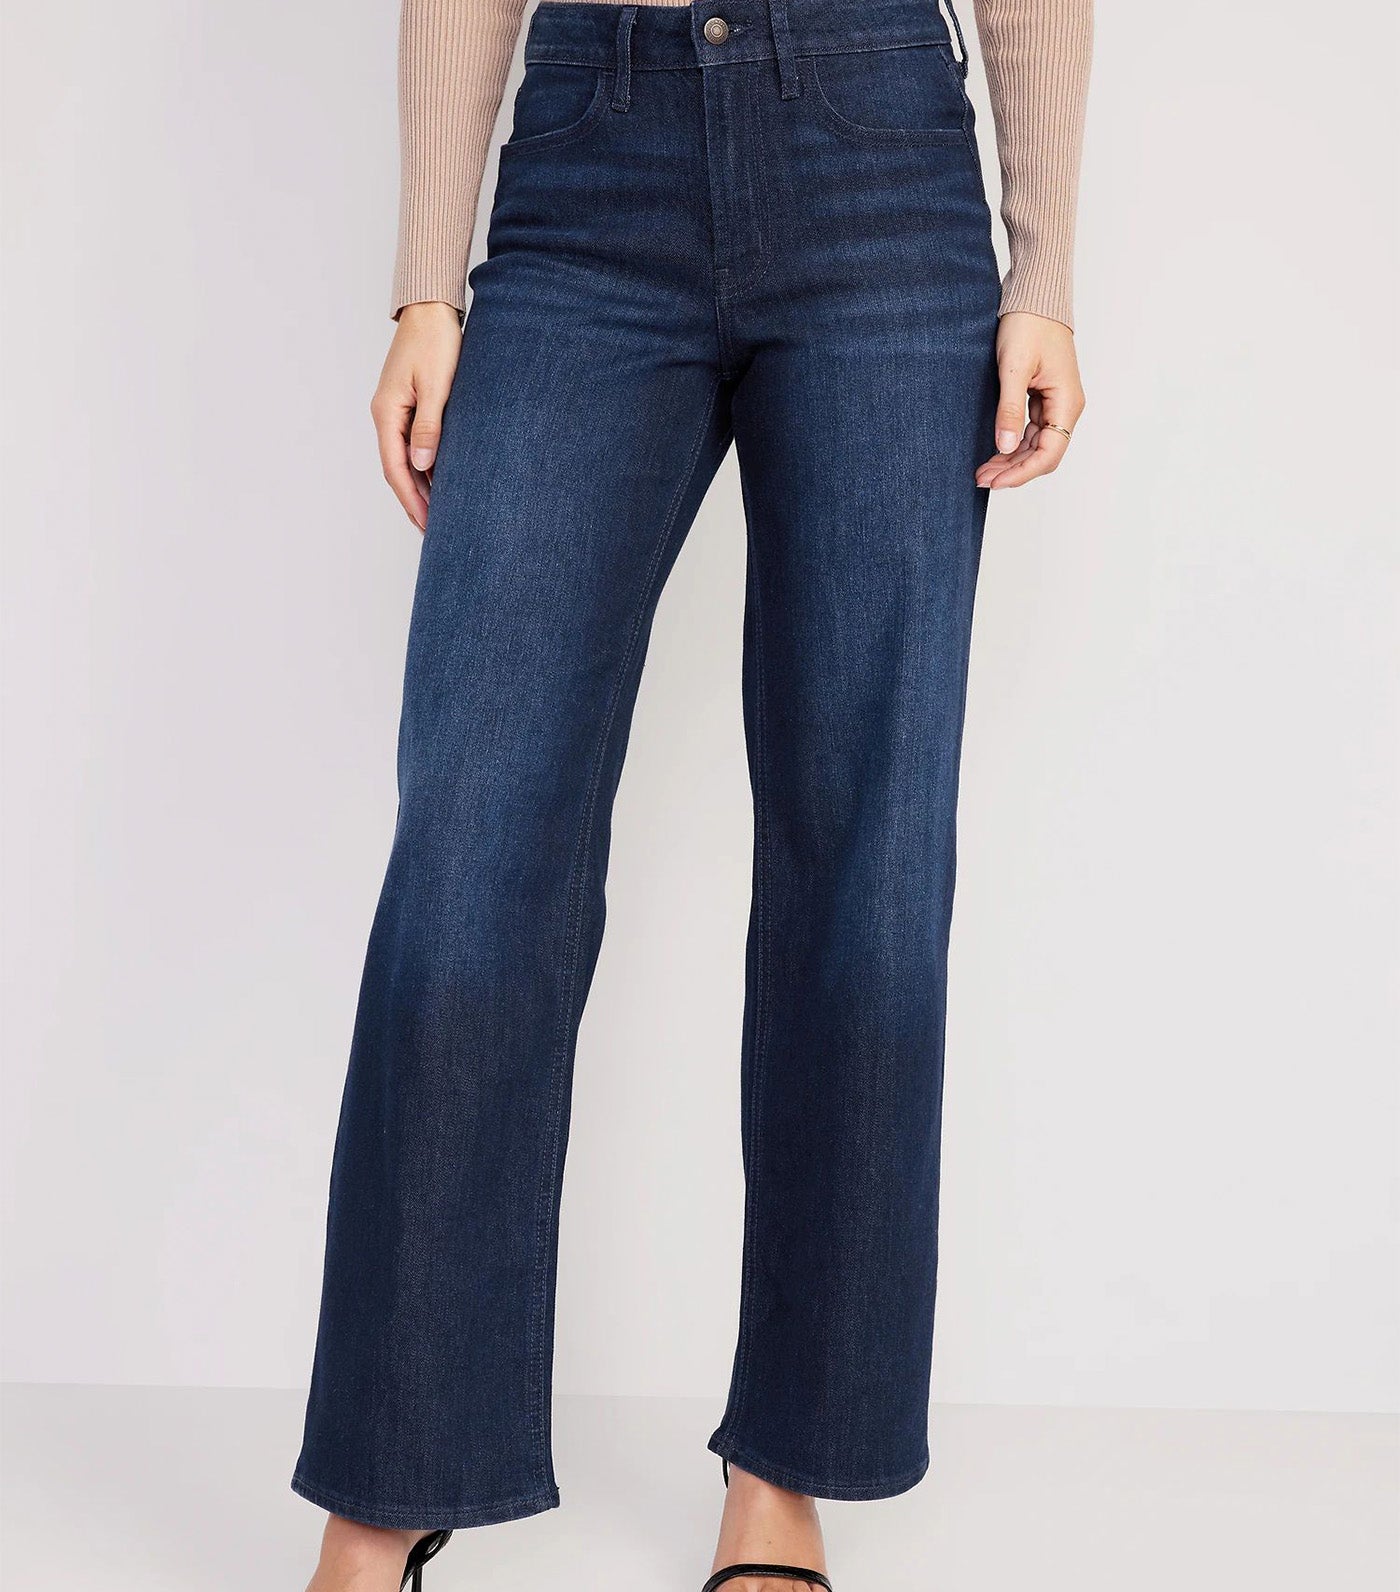 High-Waisted Wow Wide-Leg Jeans for Women River